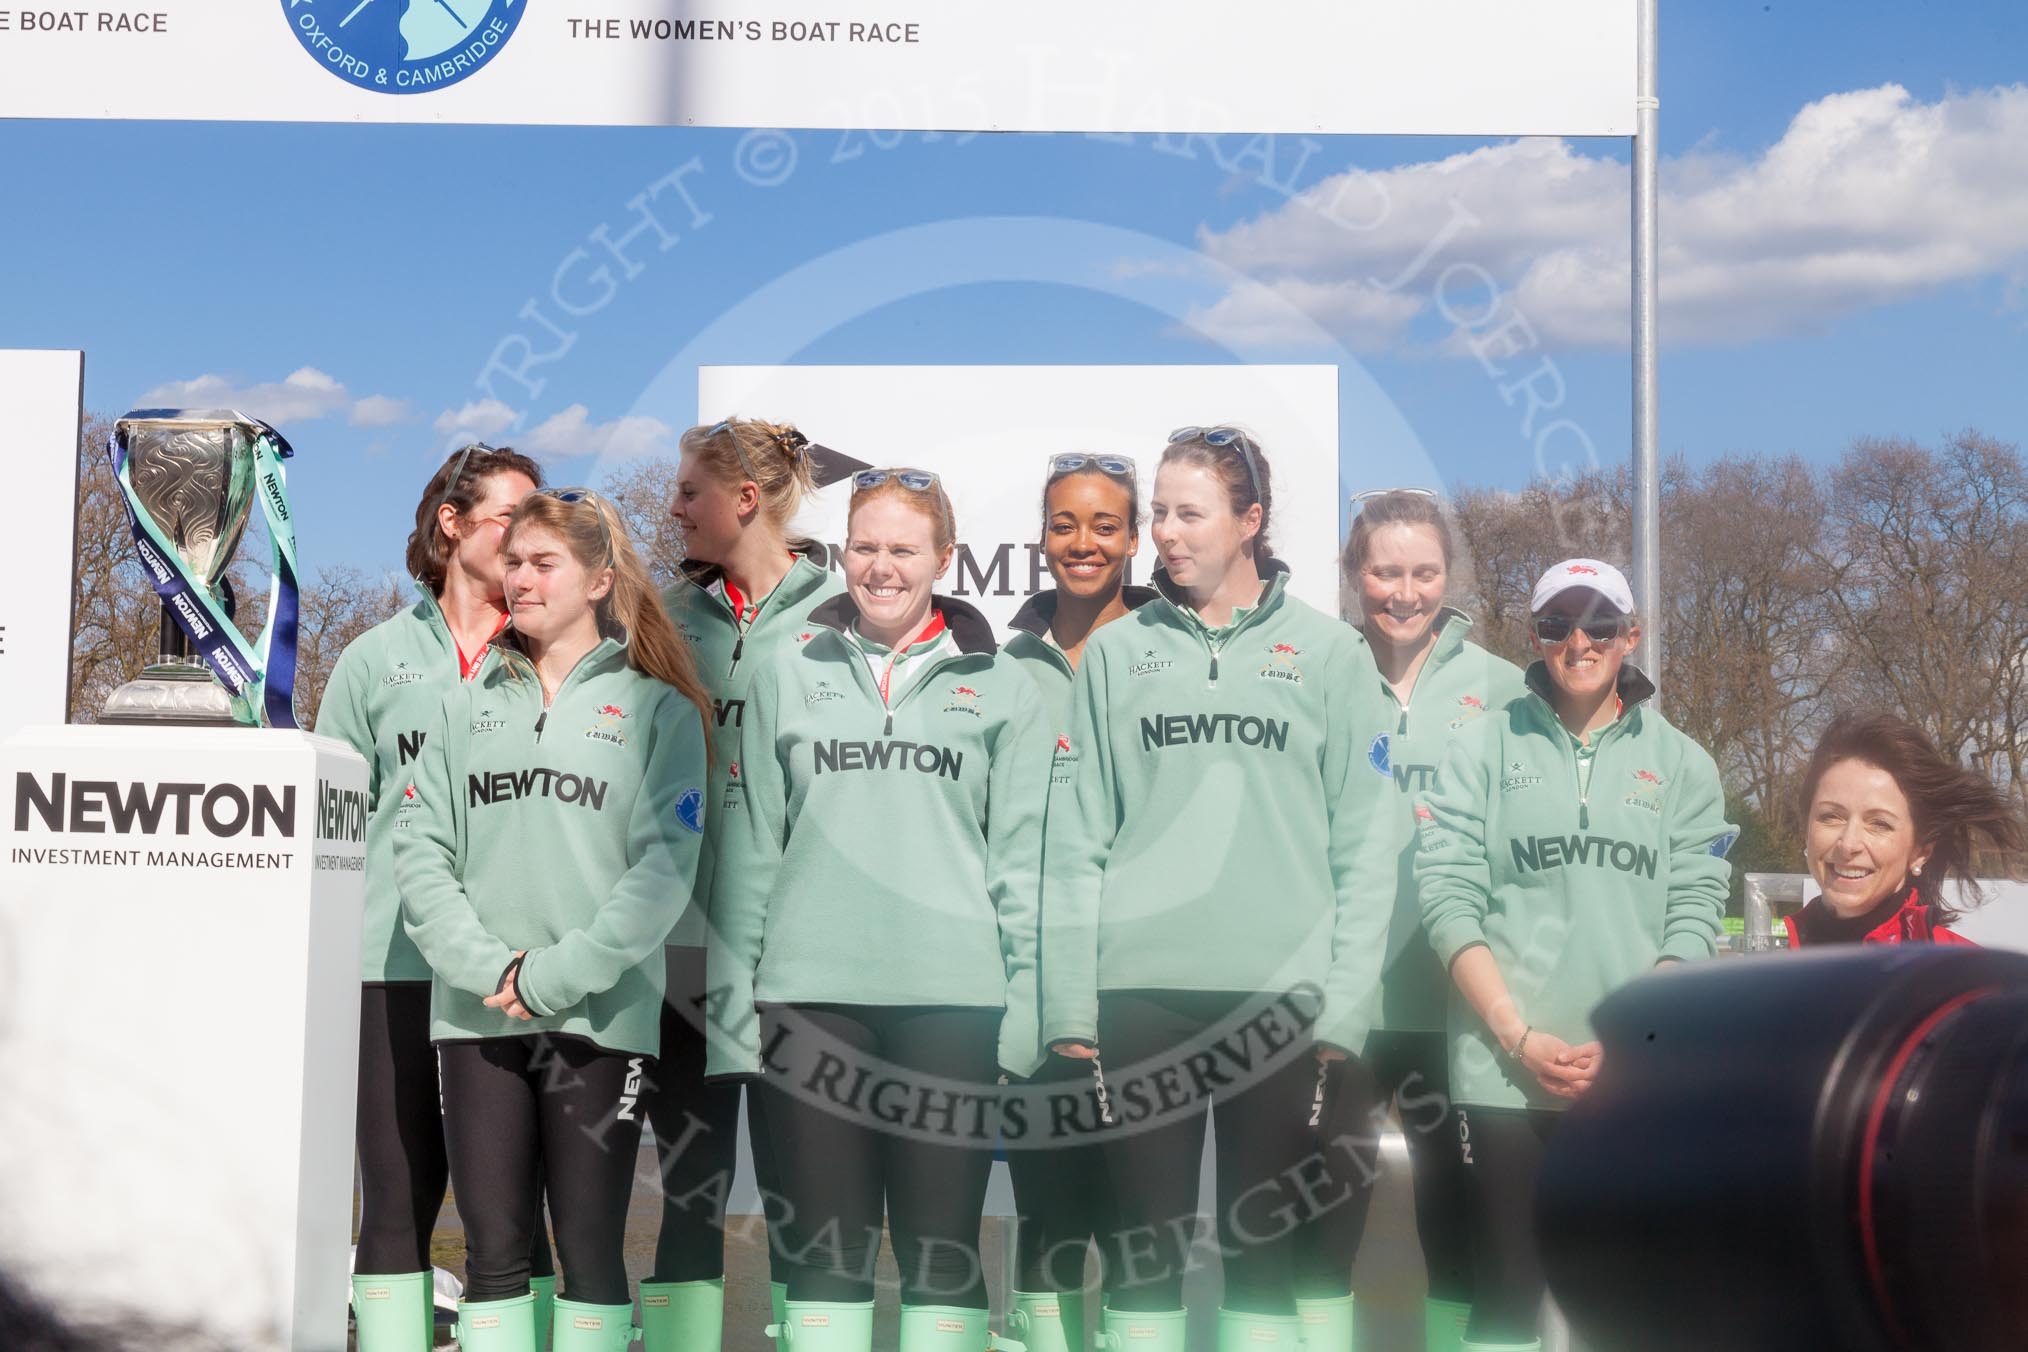 The Boat Race season 2015 - Newton Women's Boat Race.
River Thames between Putney and Mortlake,
London,

United Kingdom,
on 11 April 2015 at 14:58, image #36